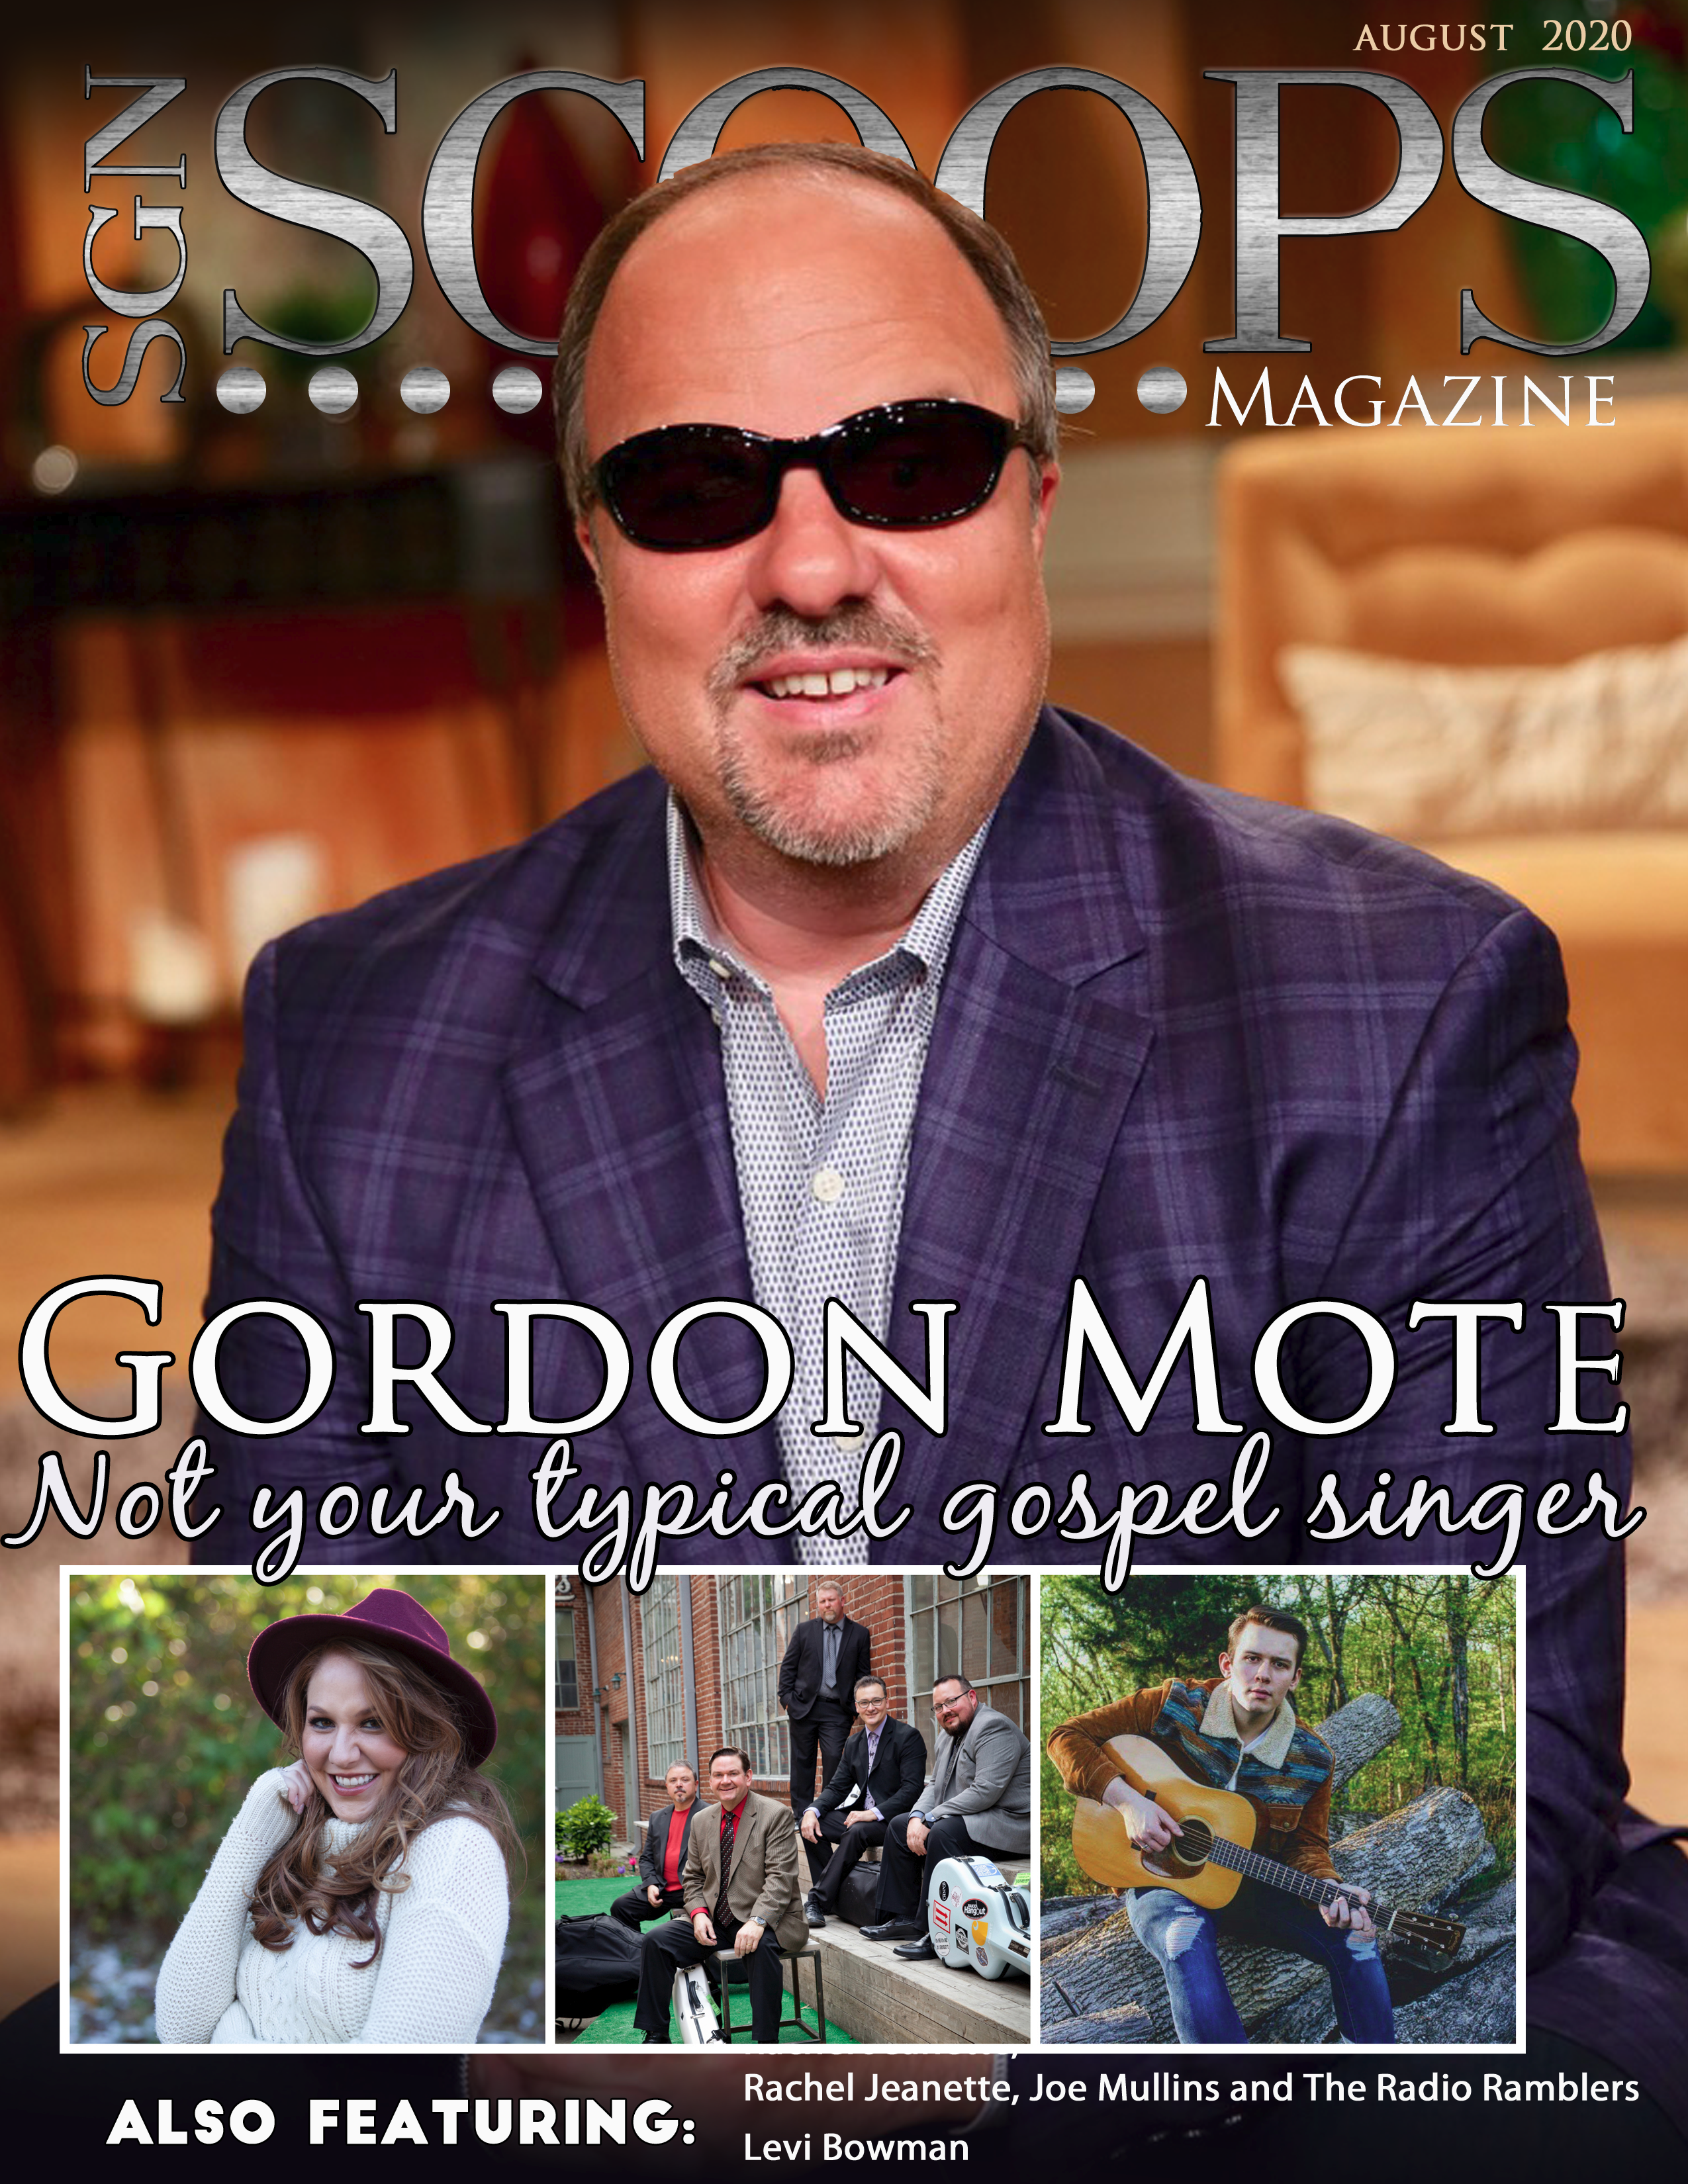 SGN Scoops Magazine